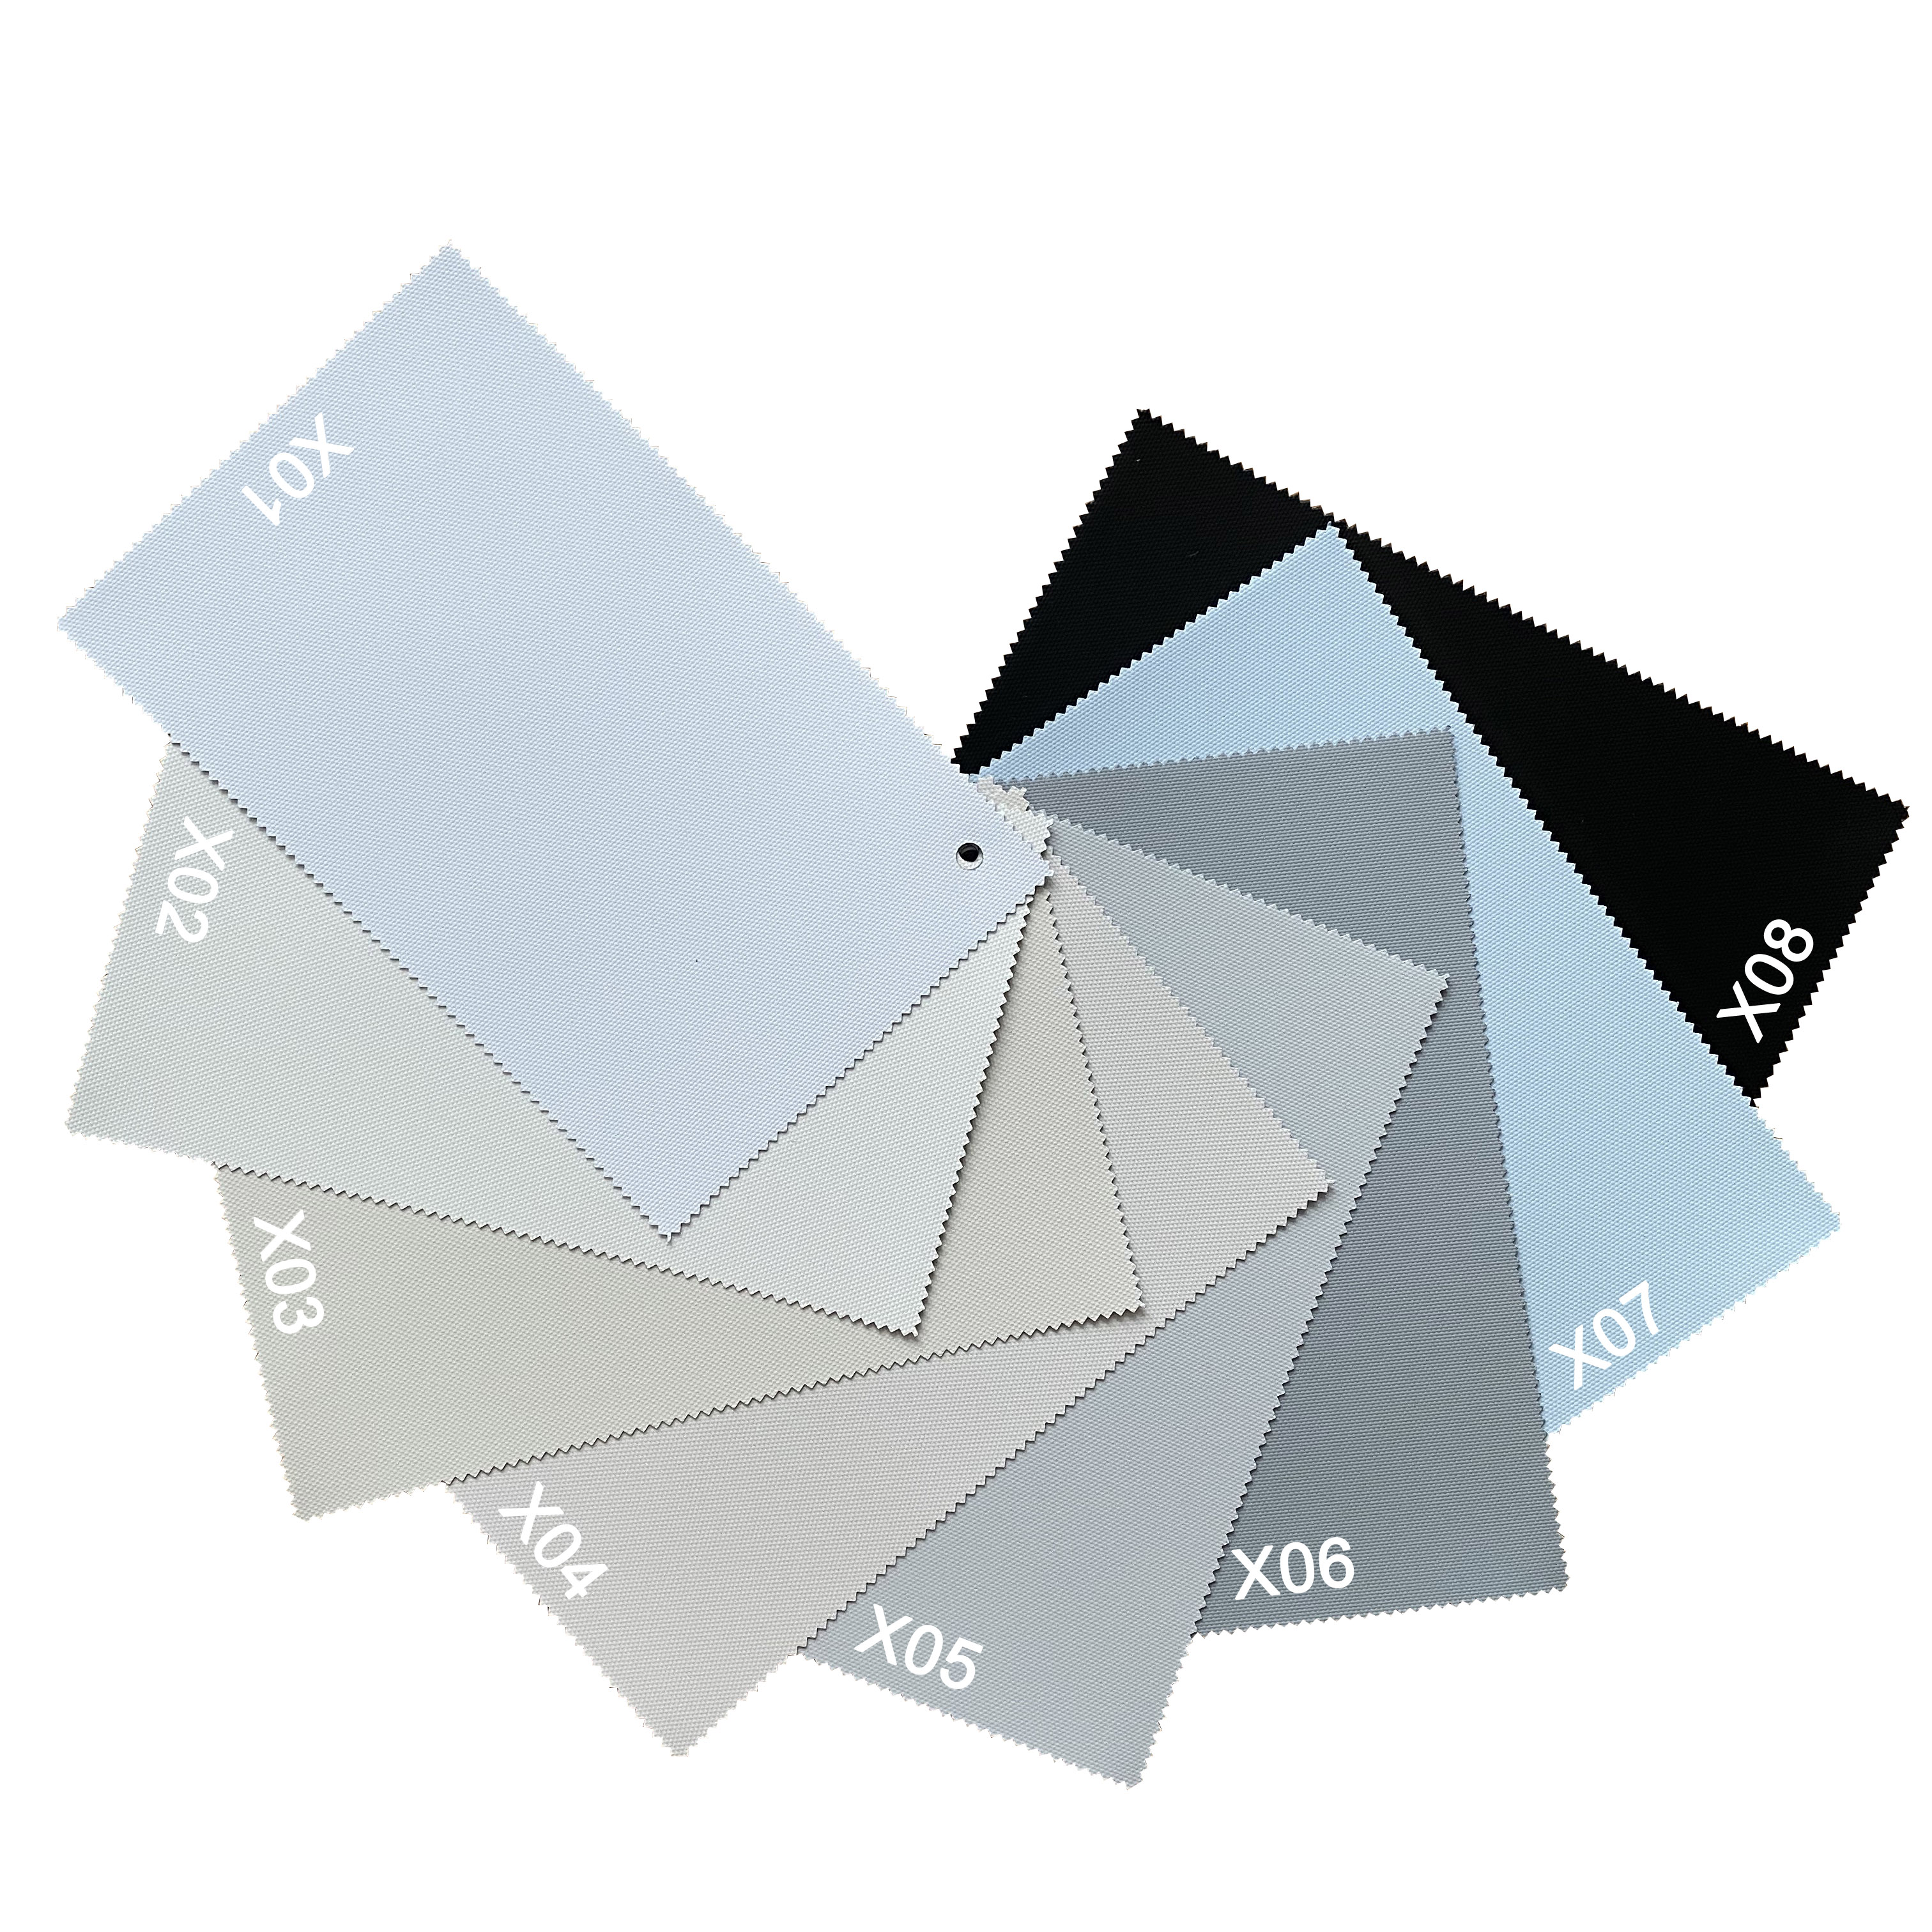 What Colors We Have For Fiberglass Blackout Roller Blind Fabric?